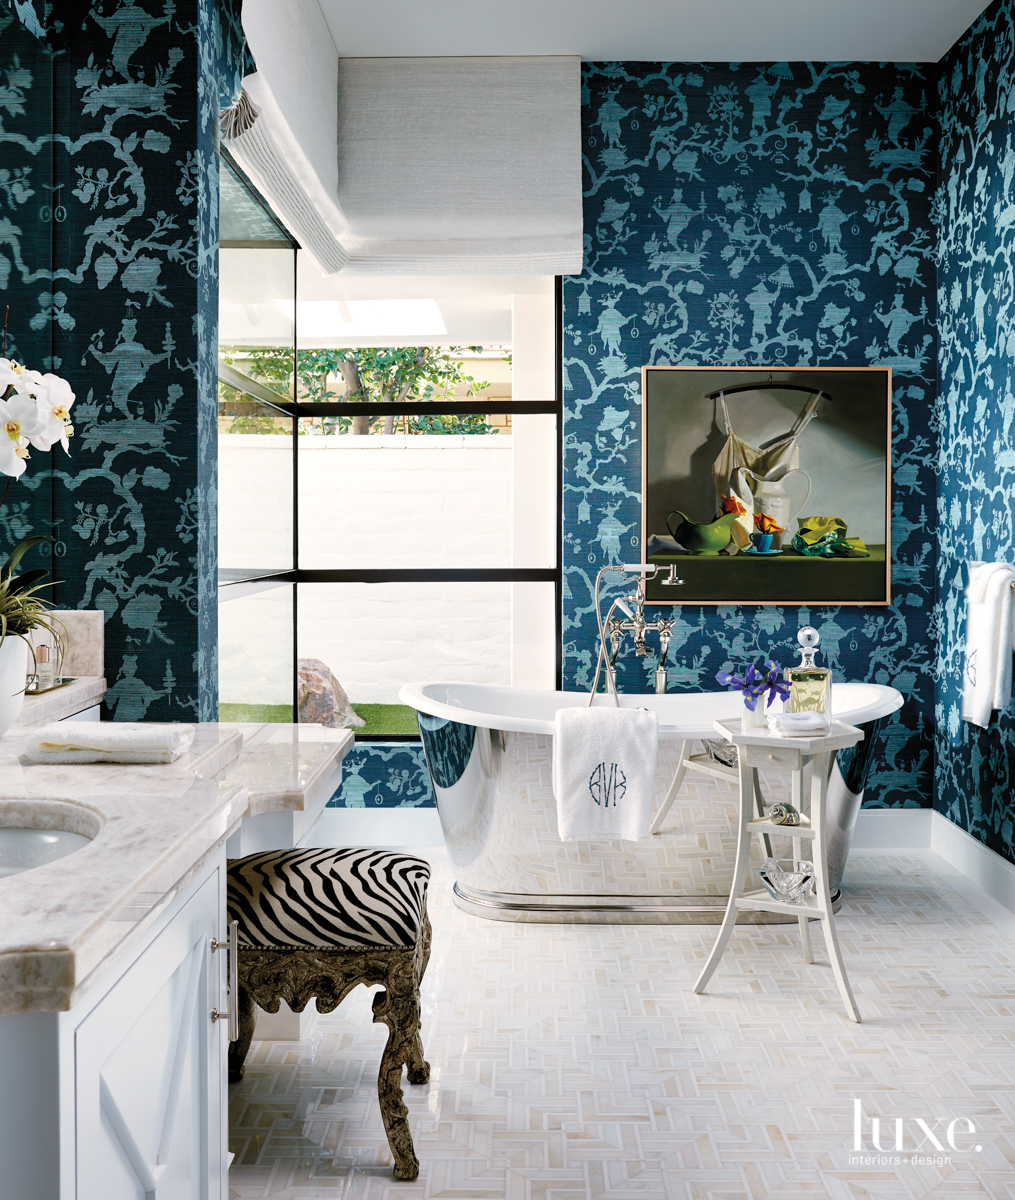 Rancho Mirage master bath with blue chinoiserie pattern wallpaper and metal freestanding tub